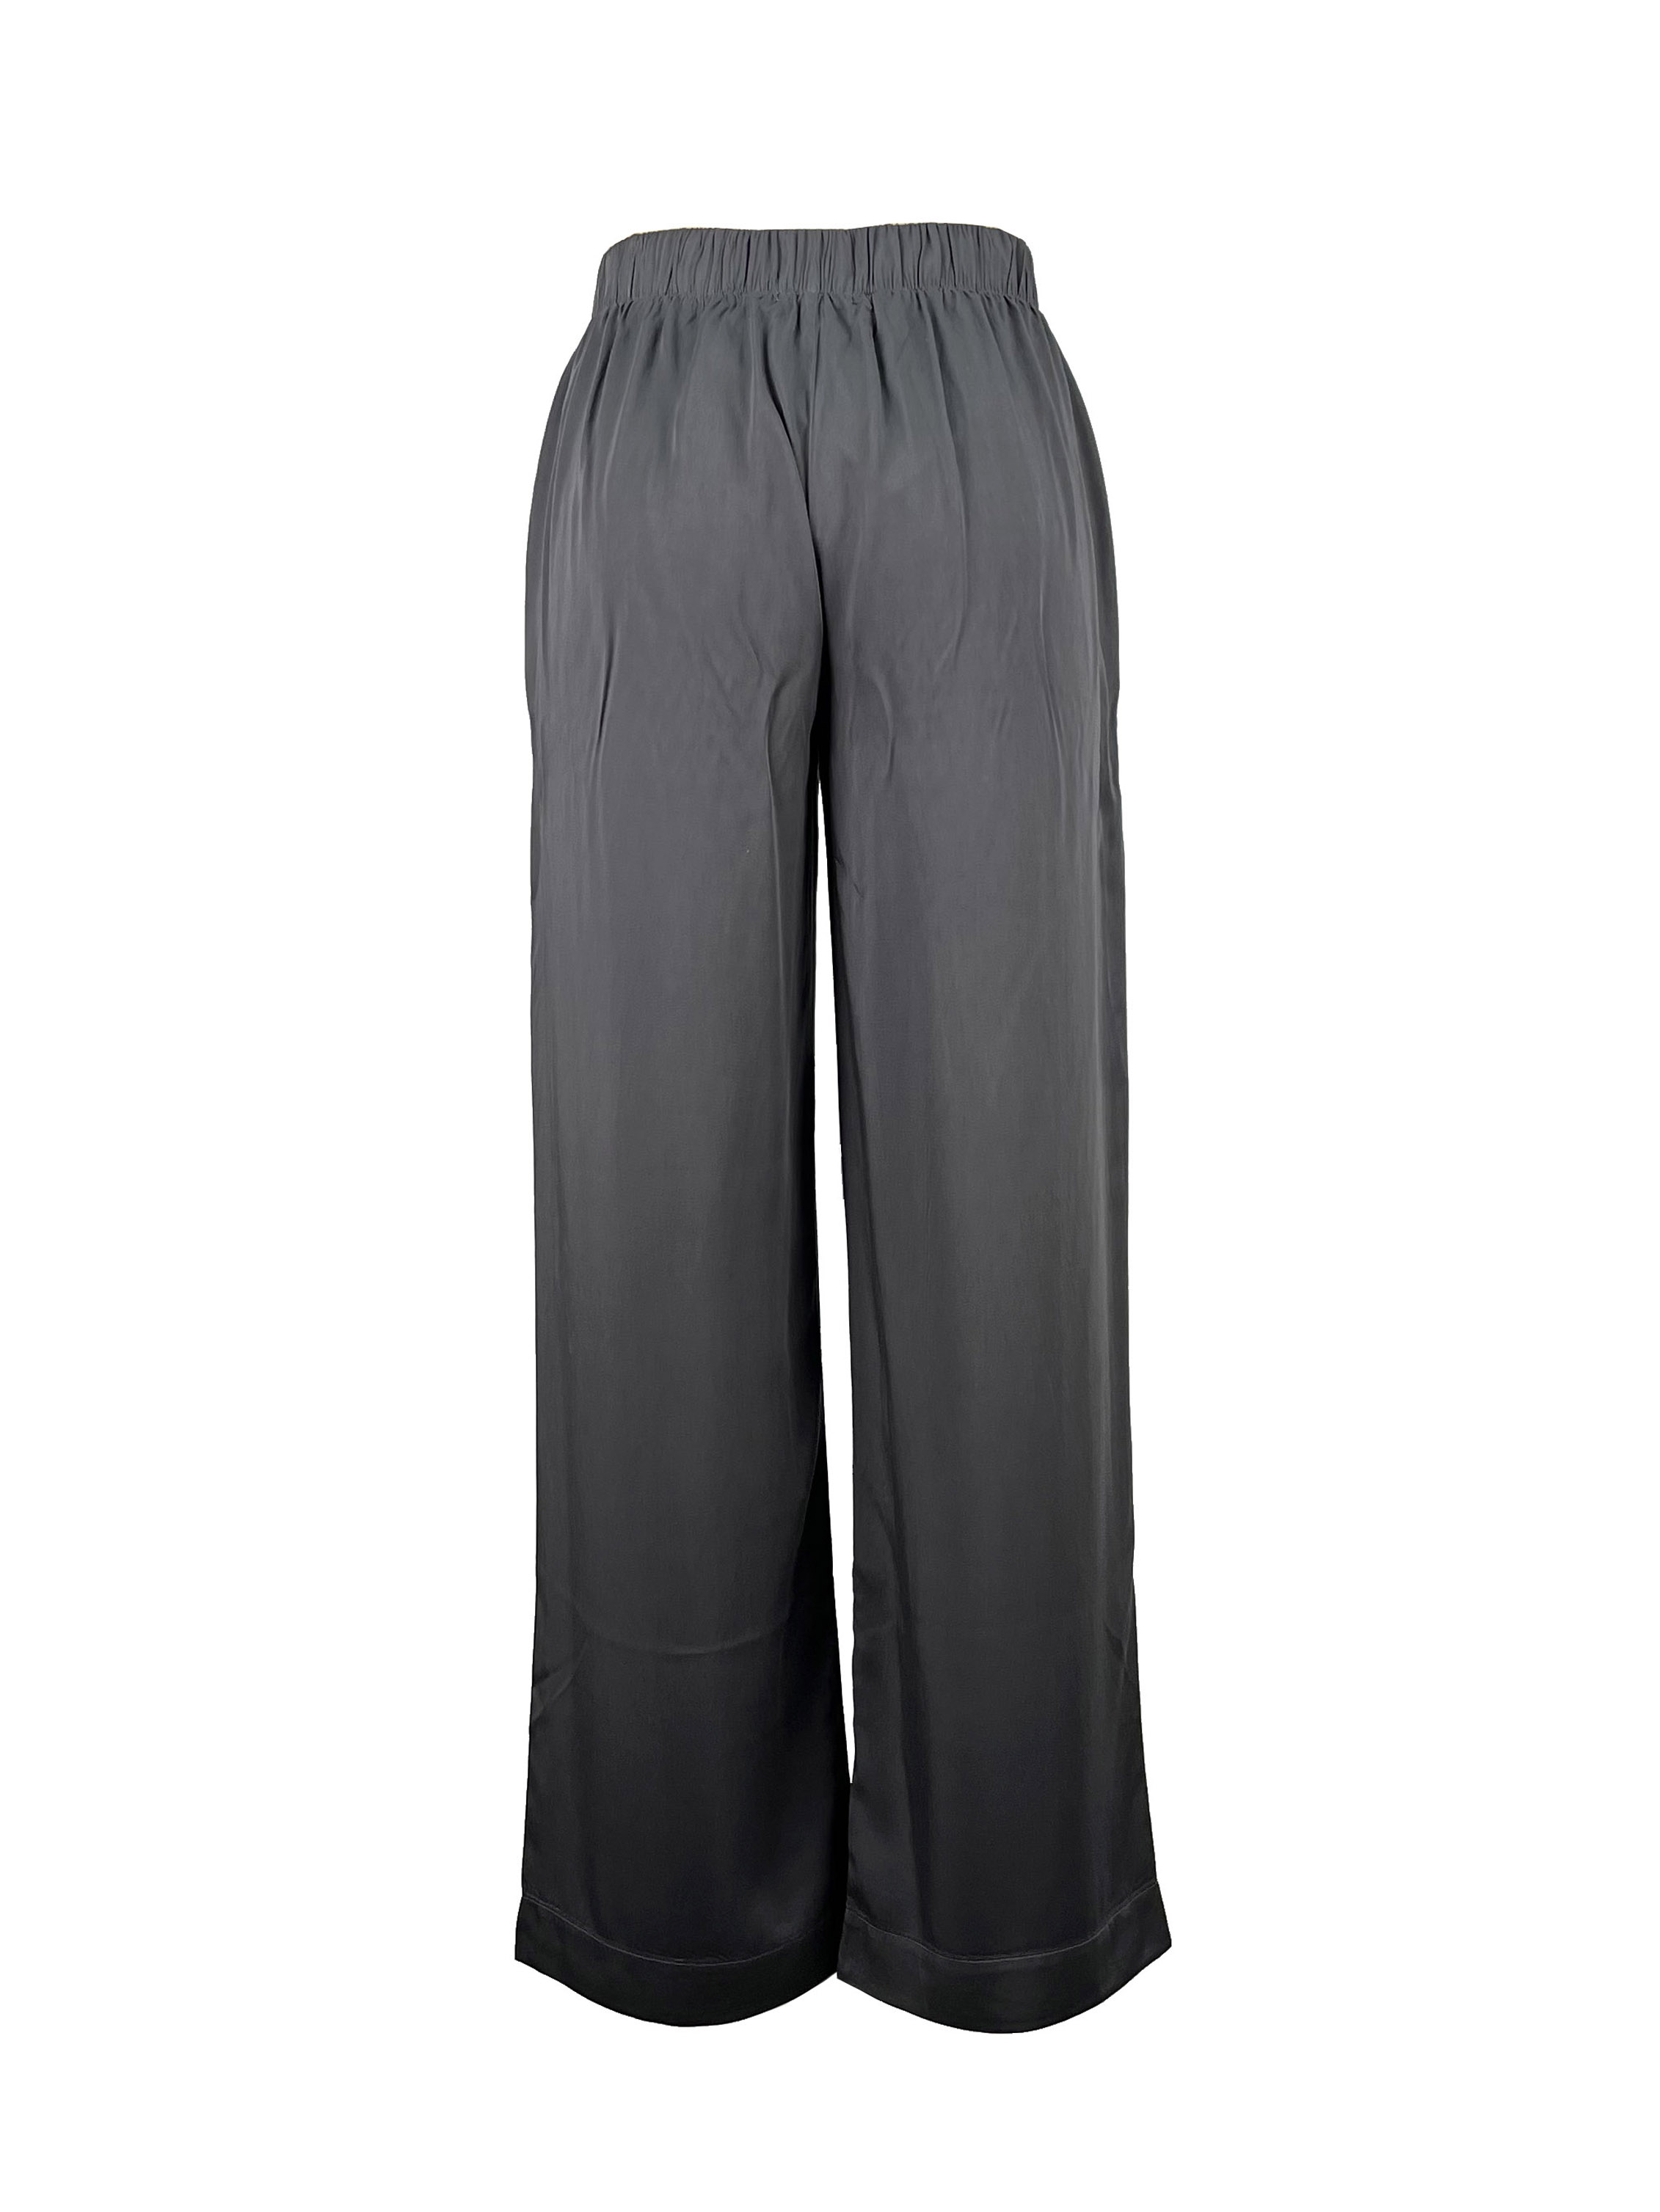 1. trousers (2)